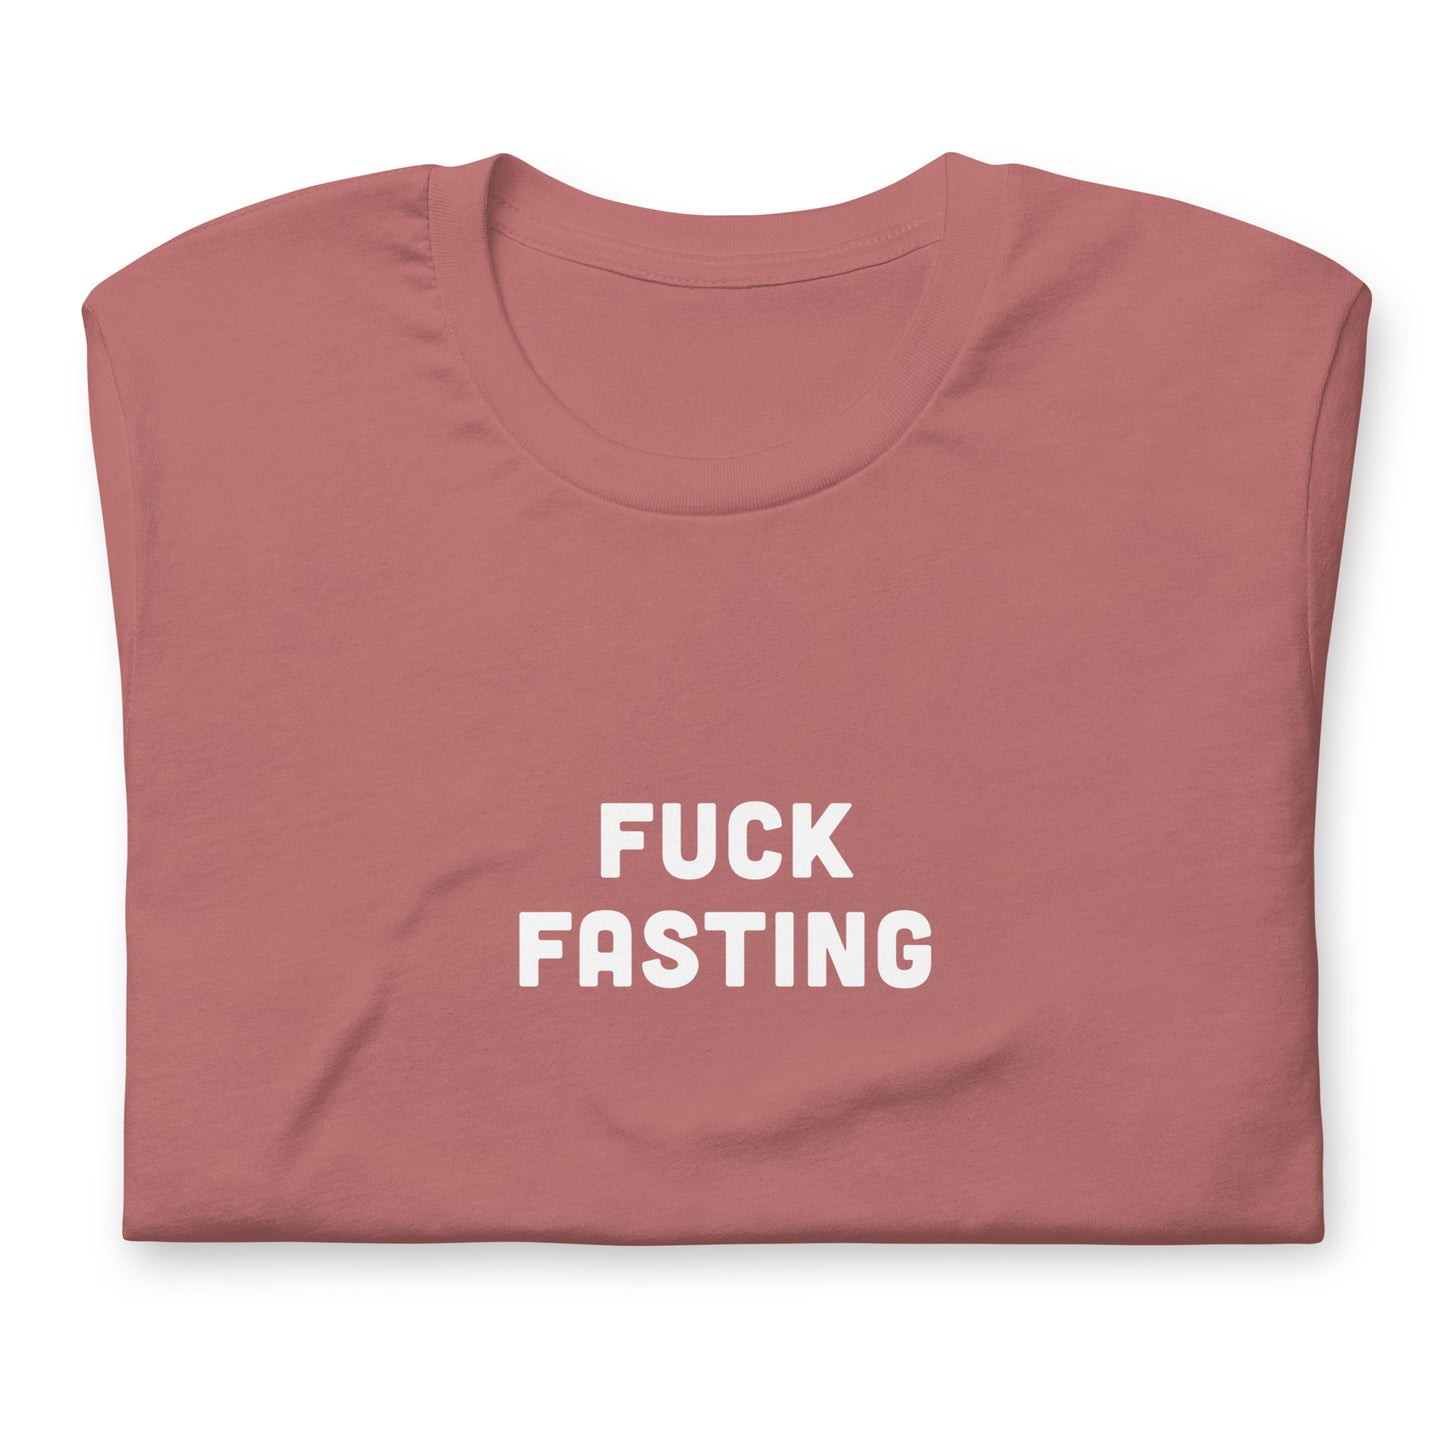 Fuck Fasting T-Shirt Size 2XL Color Navy